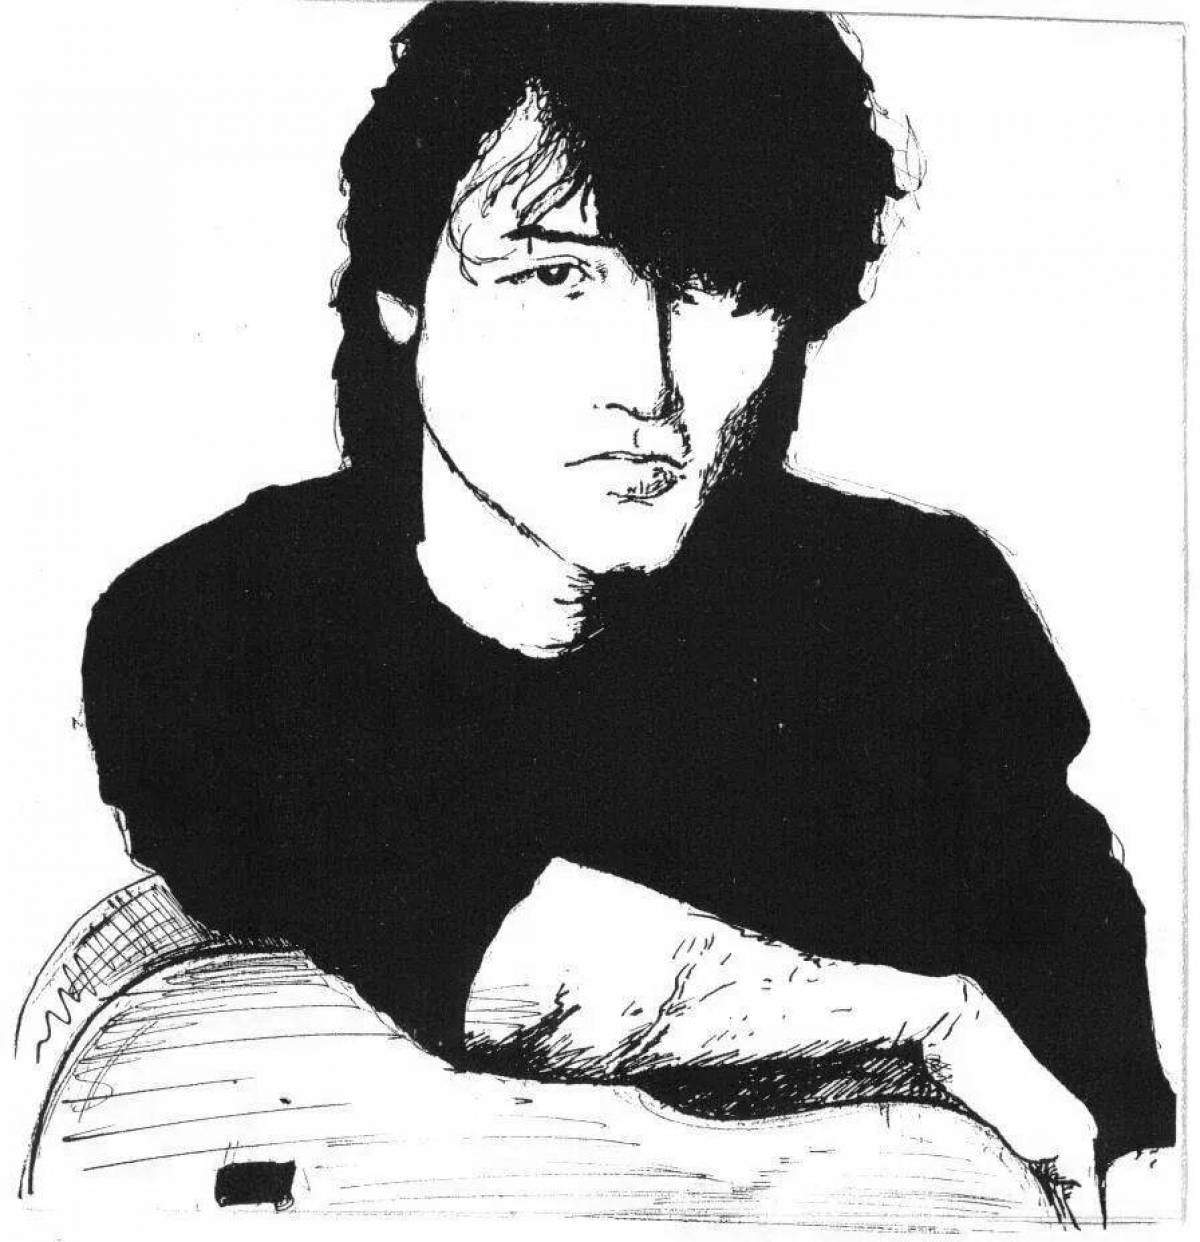 Victor Tsoi's animated coloring book